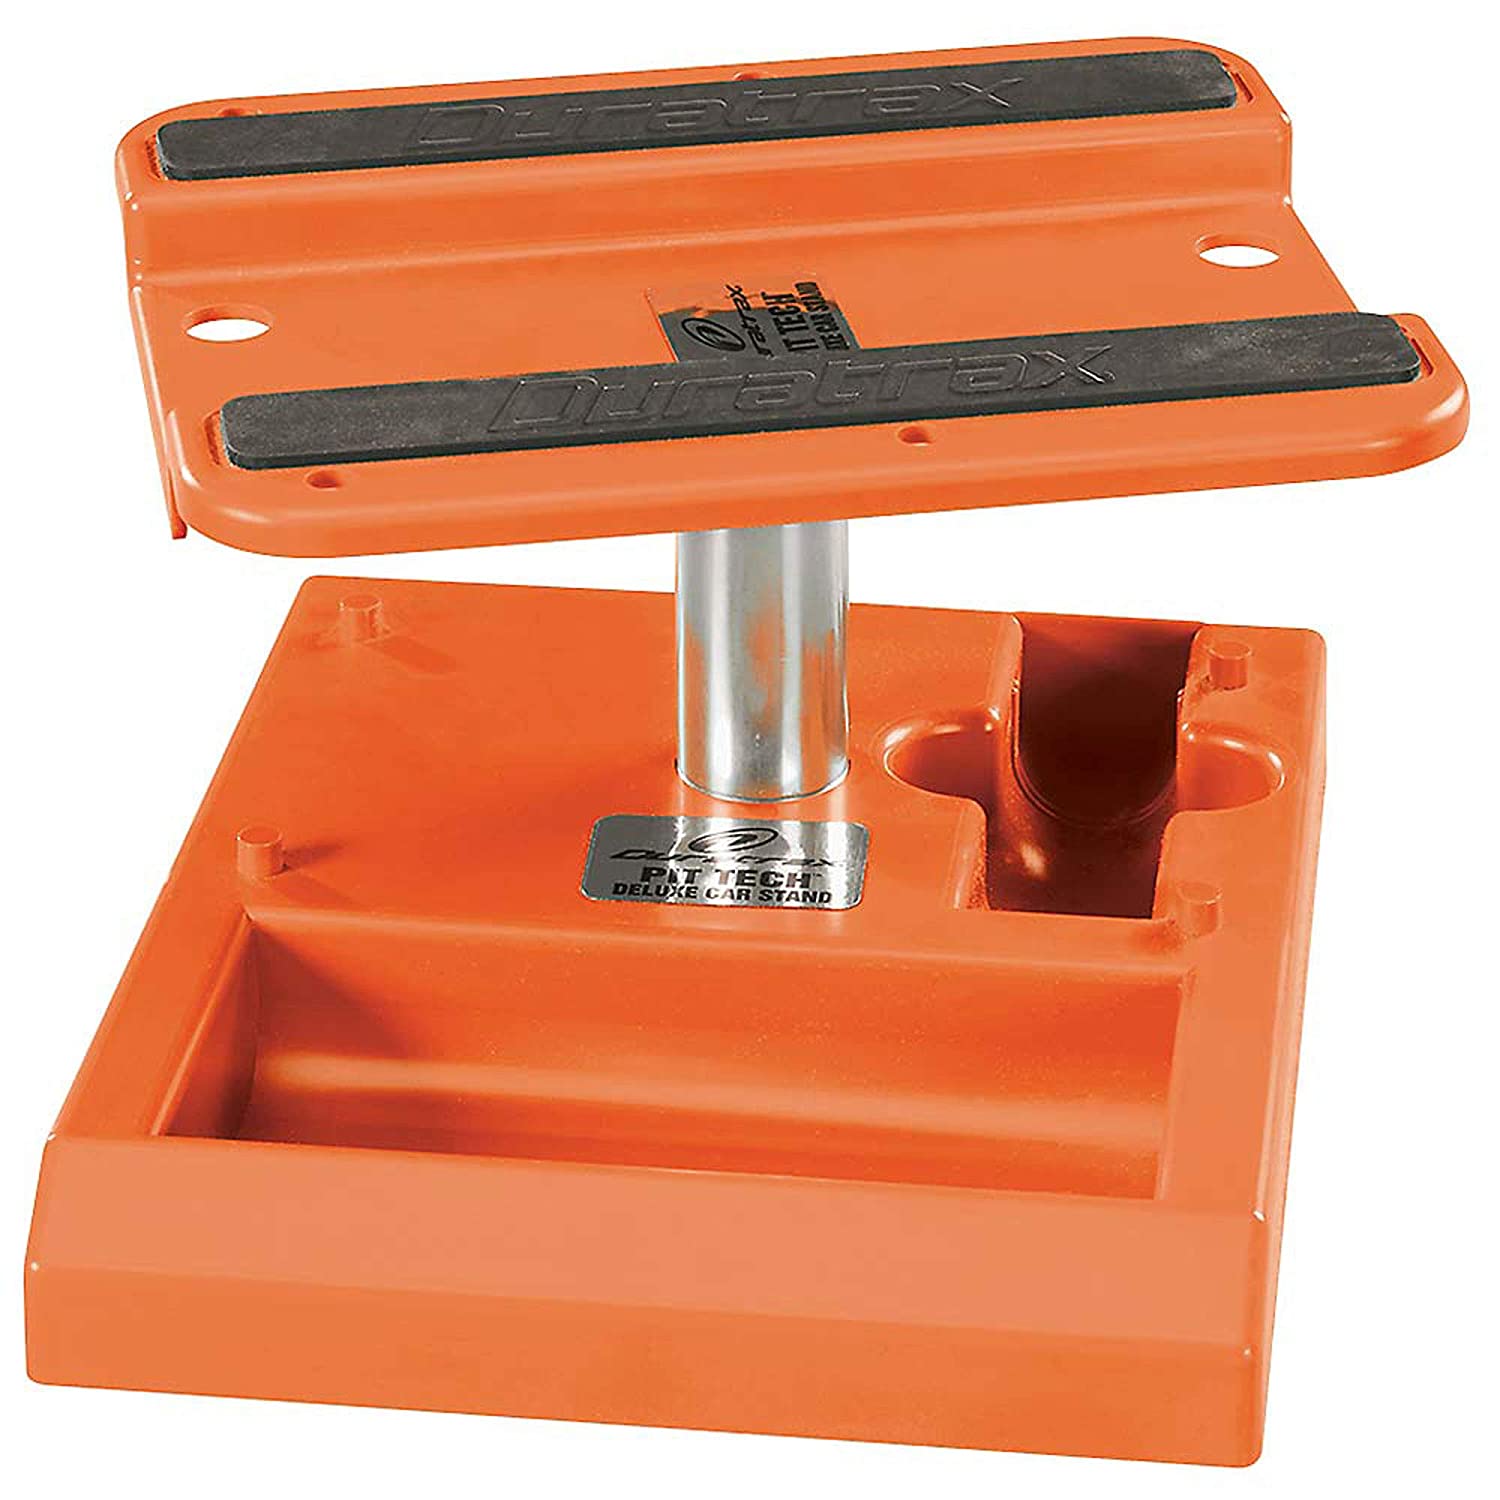 Duratrax Pit Tech Deluxe RC Car And Truck Work Stand, Orange